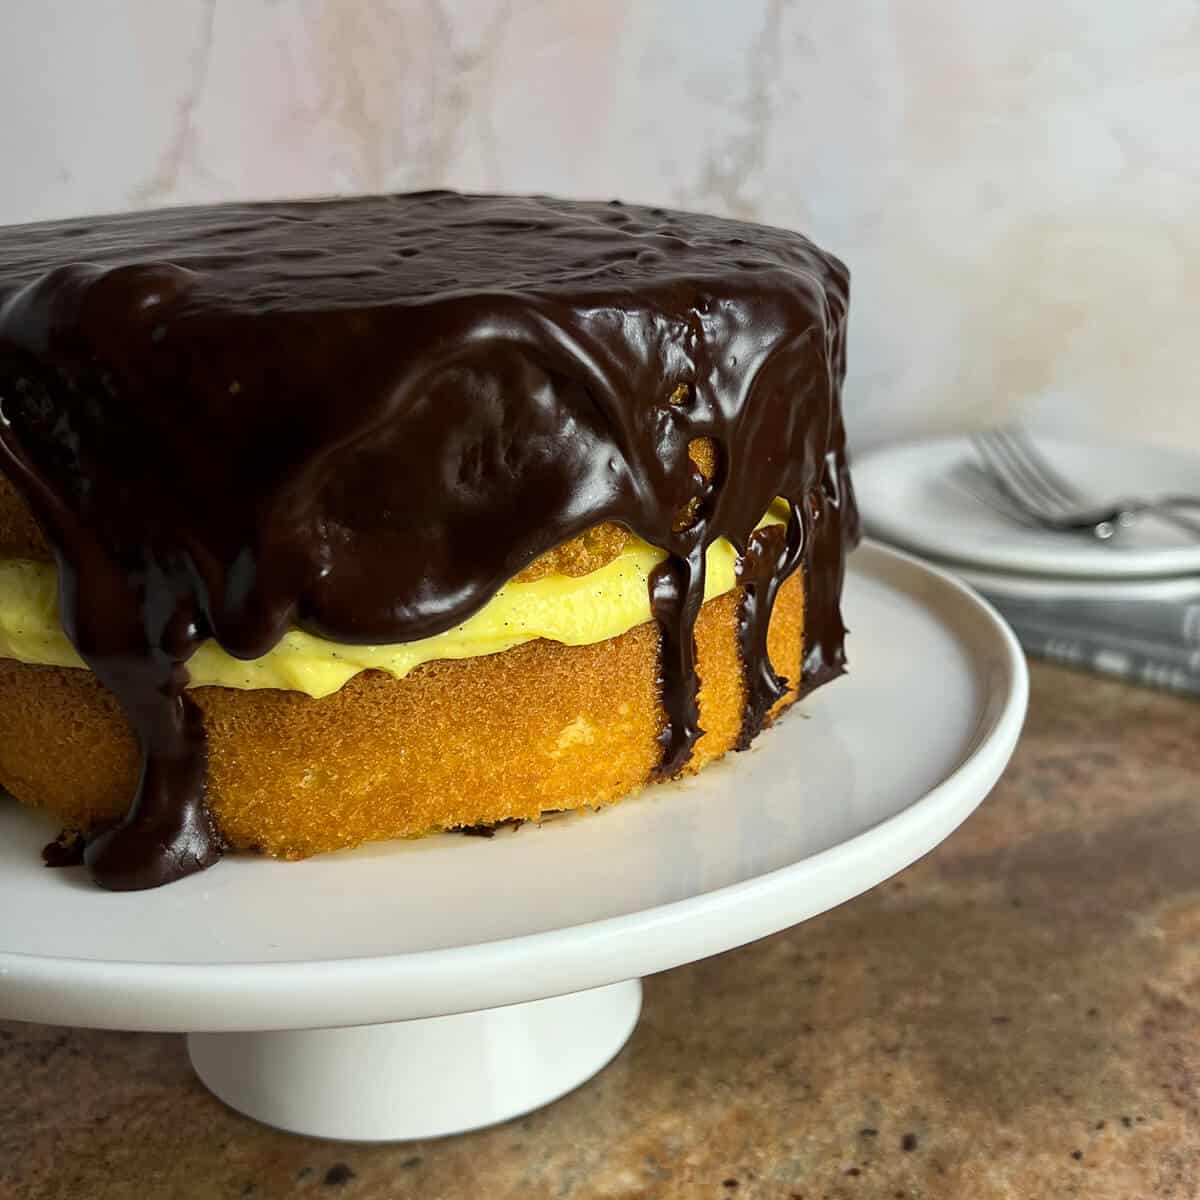 Boston Cream Pie on a white cake stand with plates & forks behind.